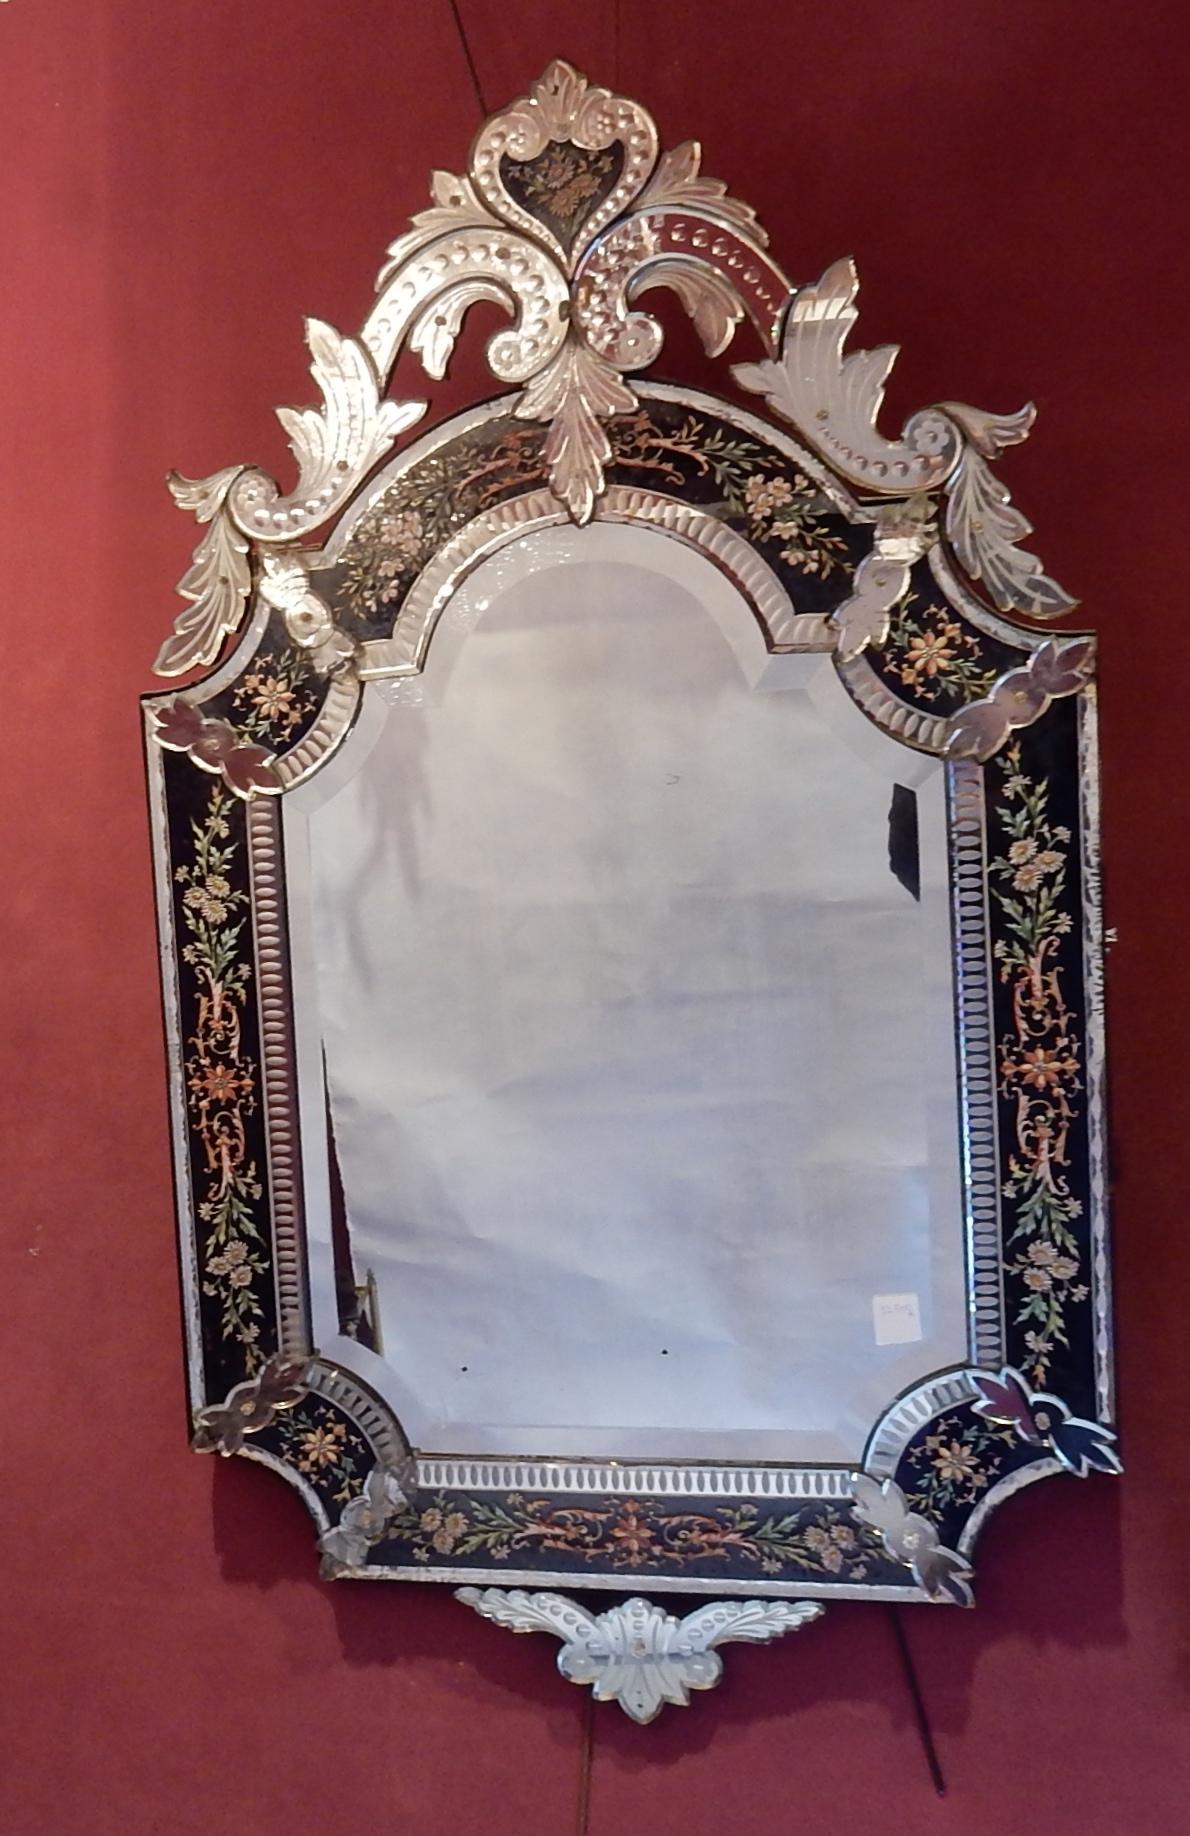 Venice rectangular mirror silvering emailed with flowers, the centre is beveled, good condition, circa 1880-1900.